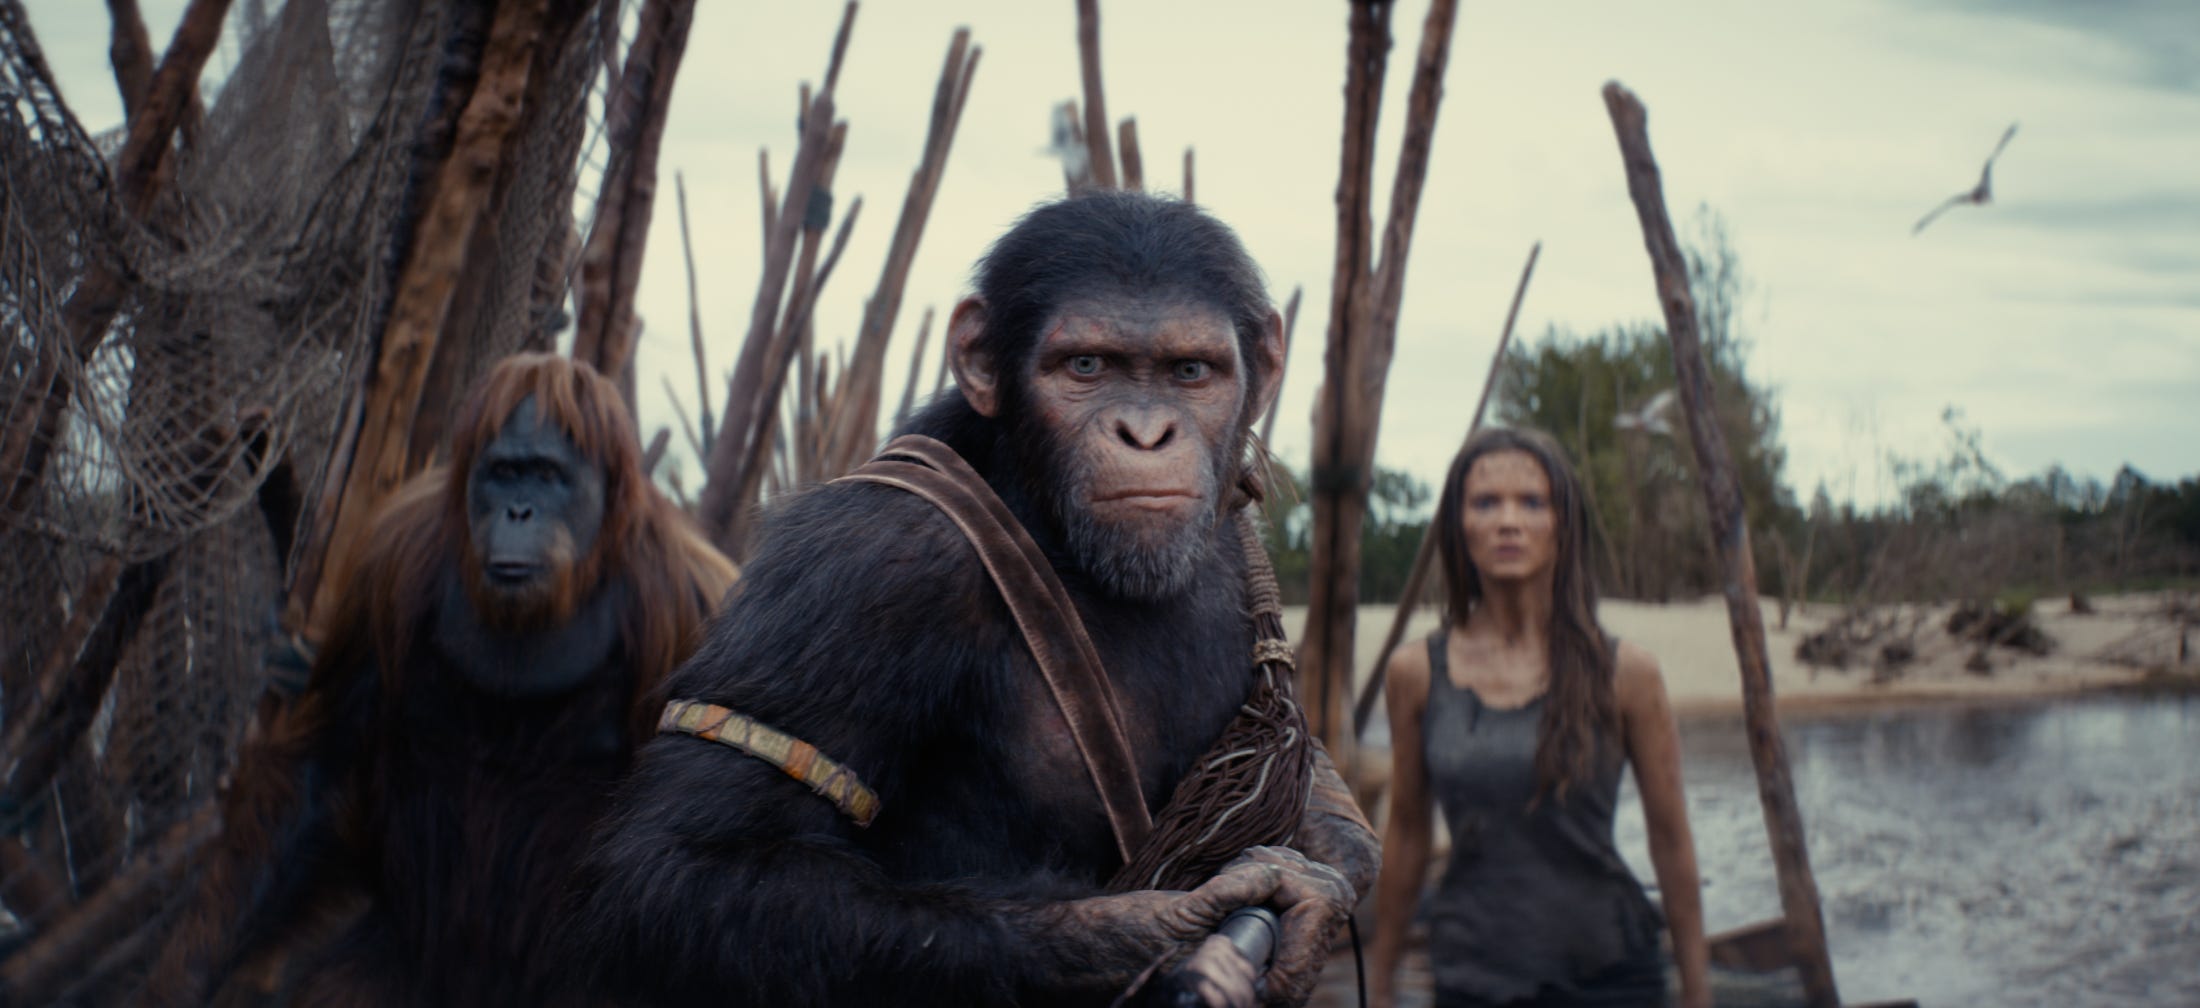 review: the simians sizzle, but story fizzles in new 'kingdom of the planet of the apes'